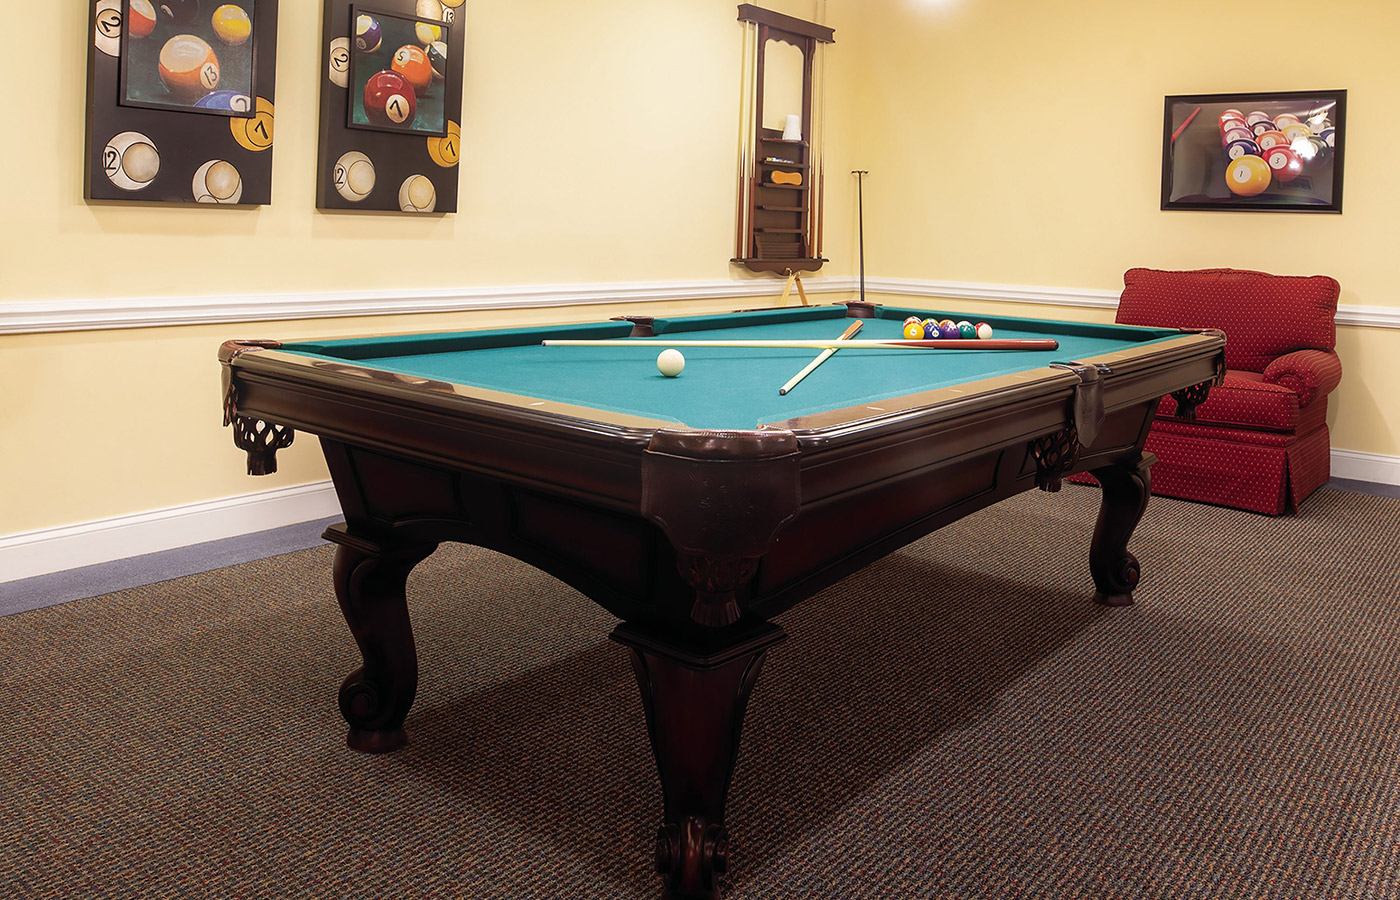 A pool table in a game room.